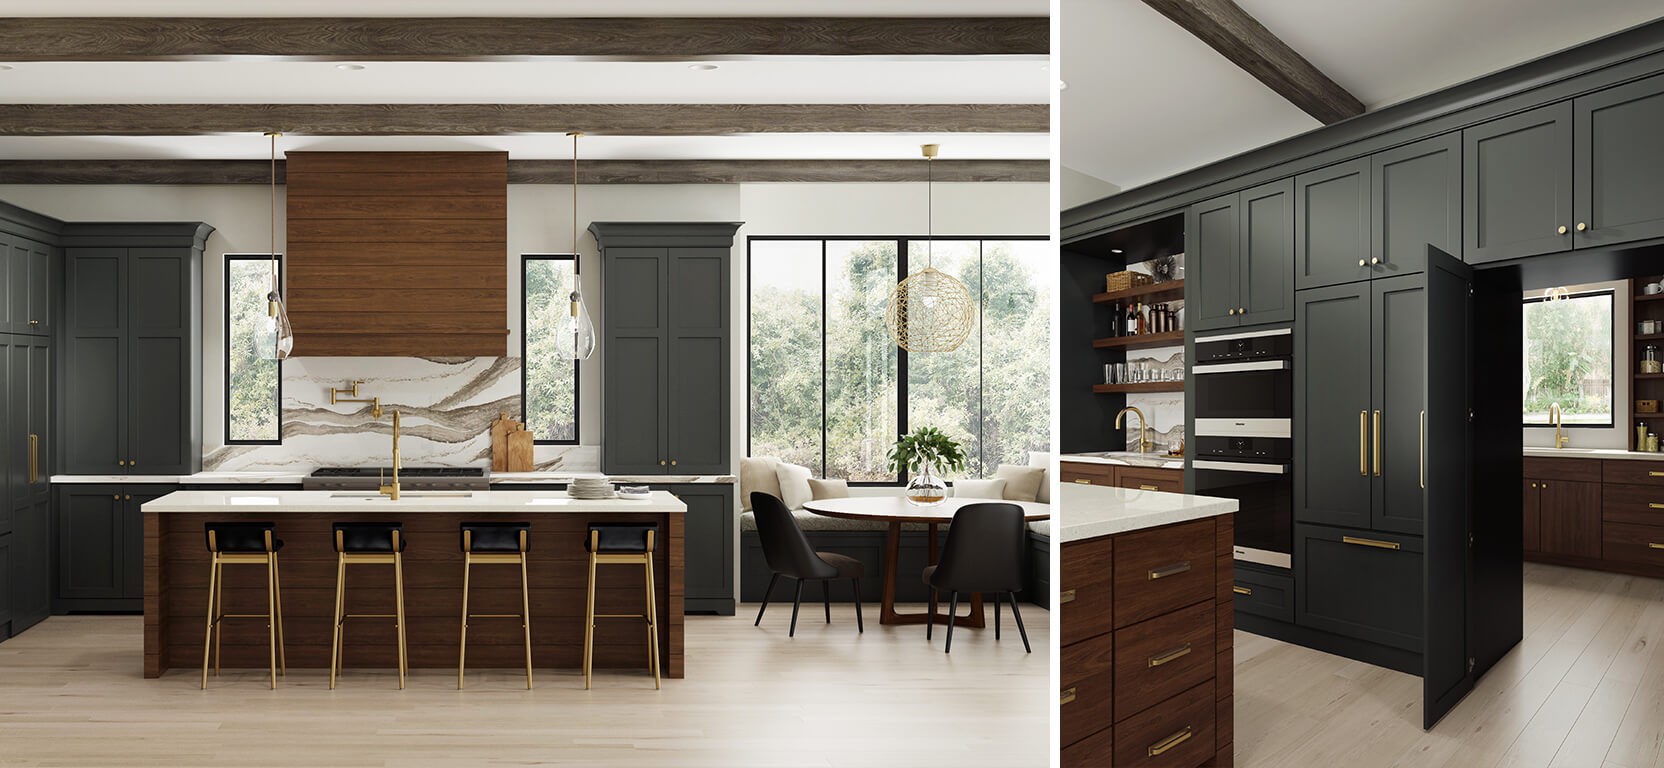 Left image: Elegant and spacious kitchen with dark green cabinetry and white ceiling with exposed dark wood beams.  Right image: Shot of dark green kitchen cabinets with a discreet door that opens into another part of the kitchen.